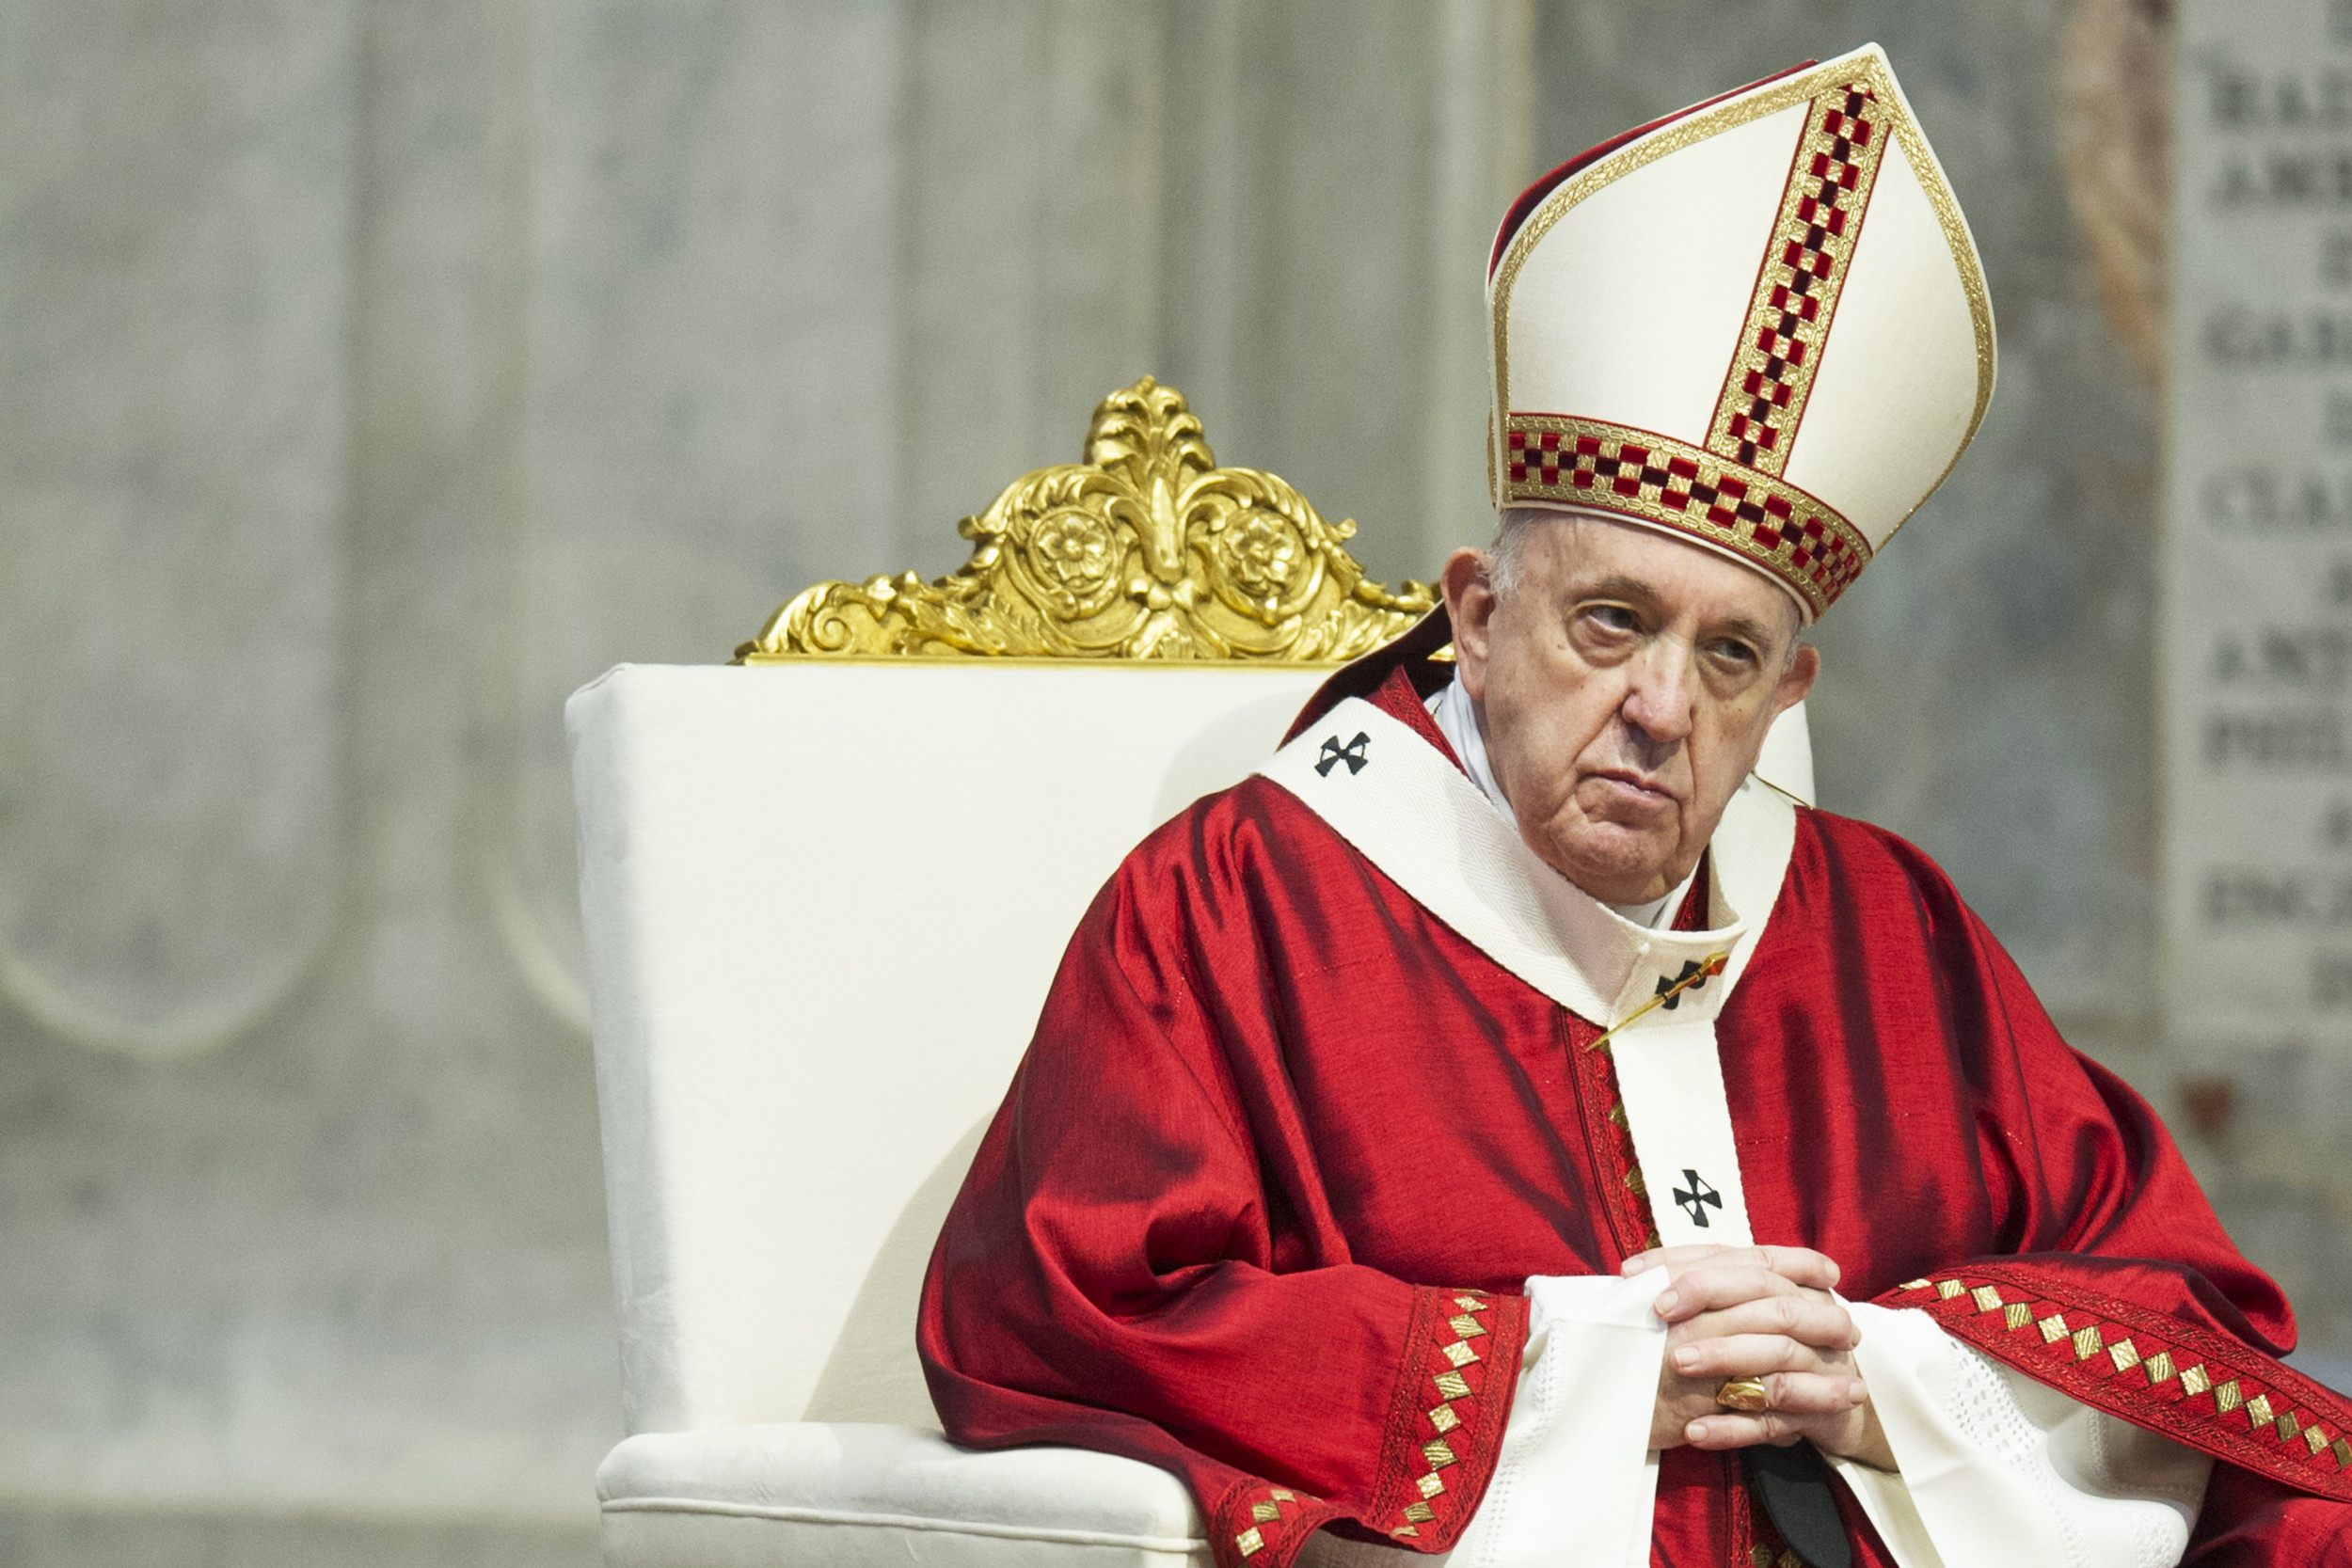 Archbishop Accuses Pope of Heresy Over 'Legitimization of ...